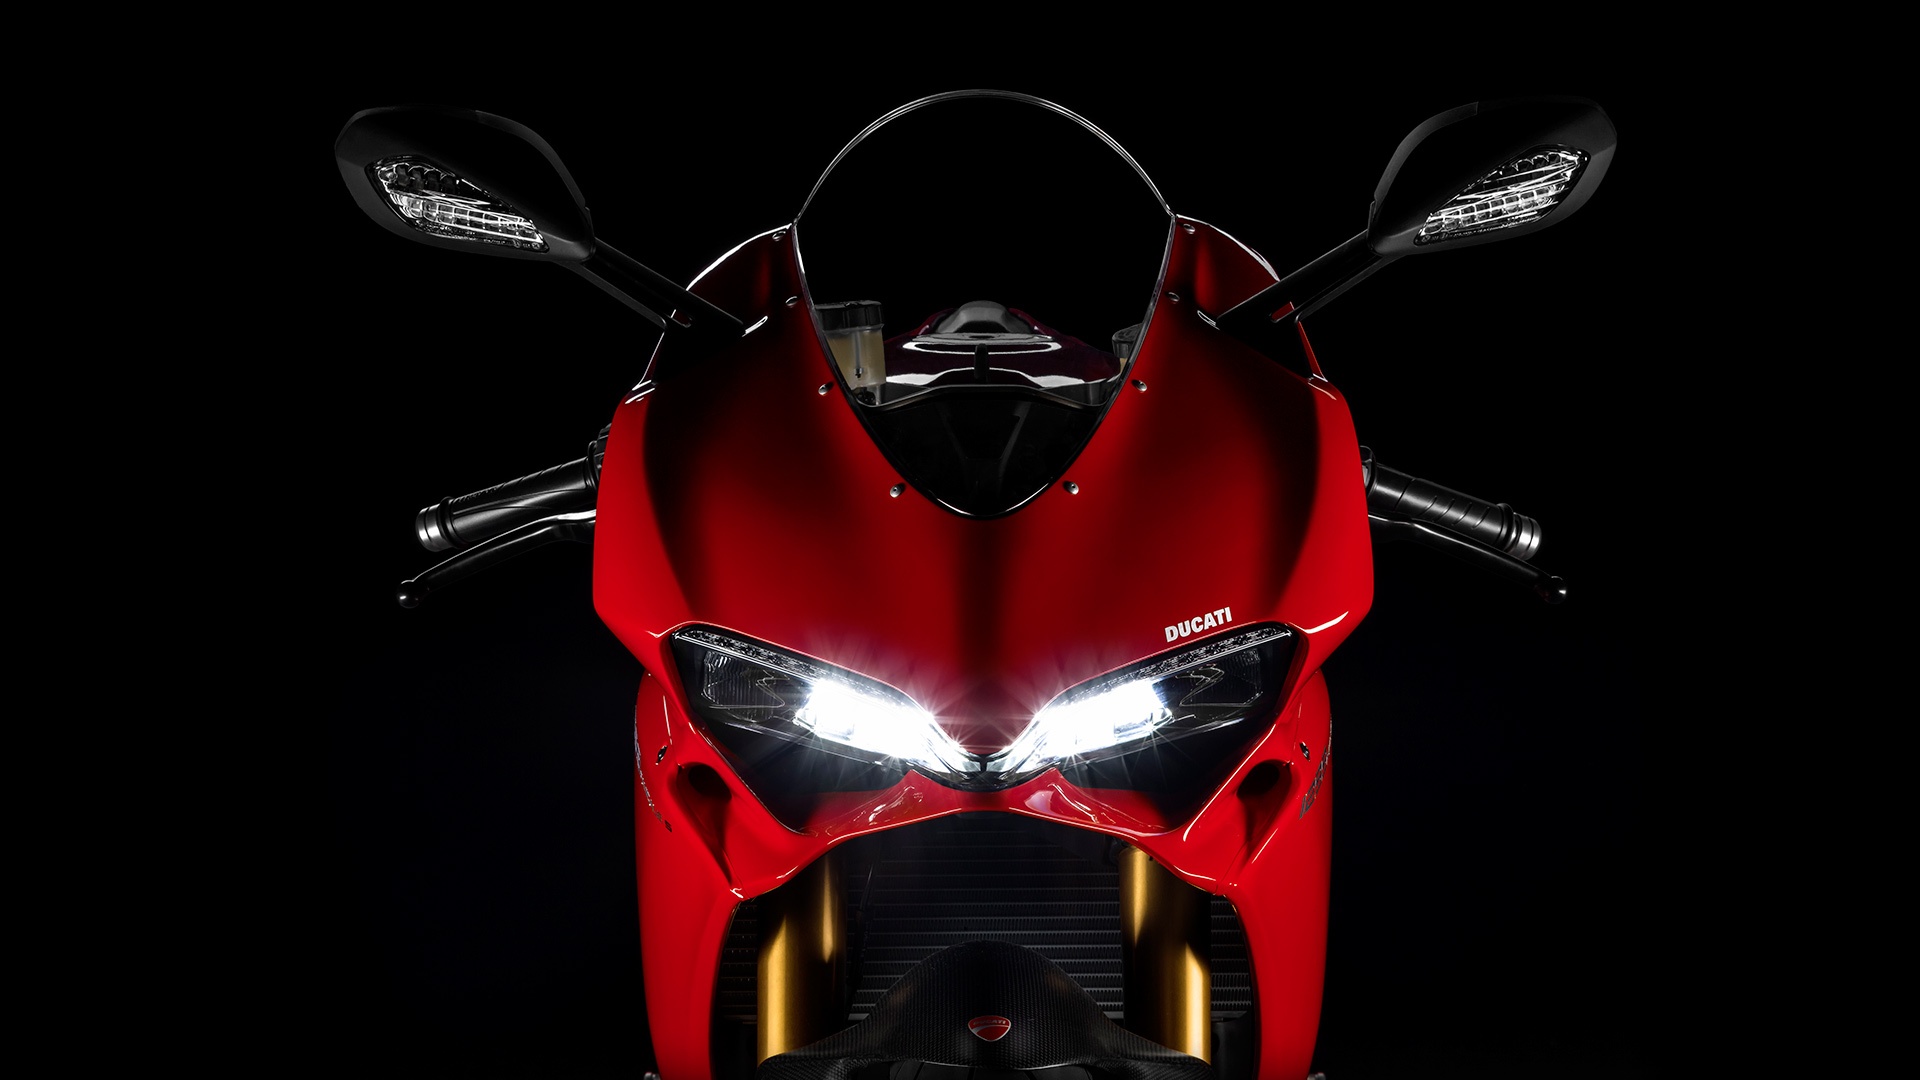 SBK-1299-Panigale-S_2015_Studio_R_A02_1920x1080_mediagallery_output_image_[1920x1080]